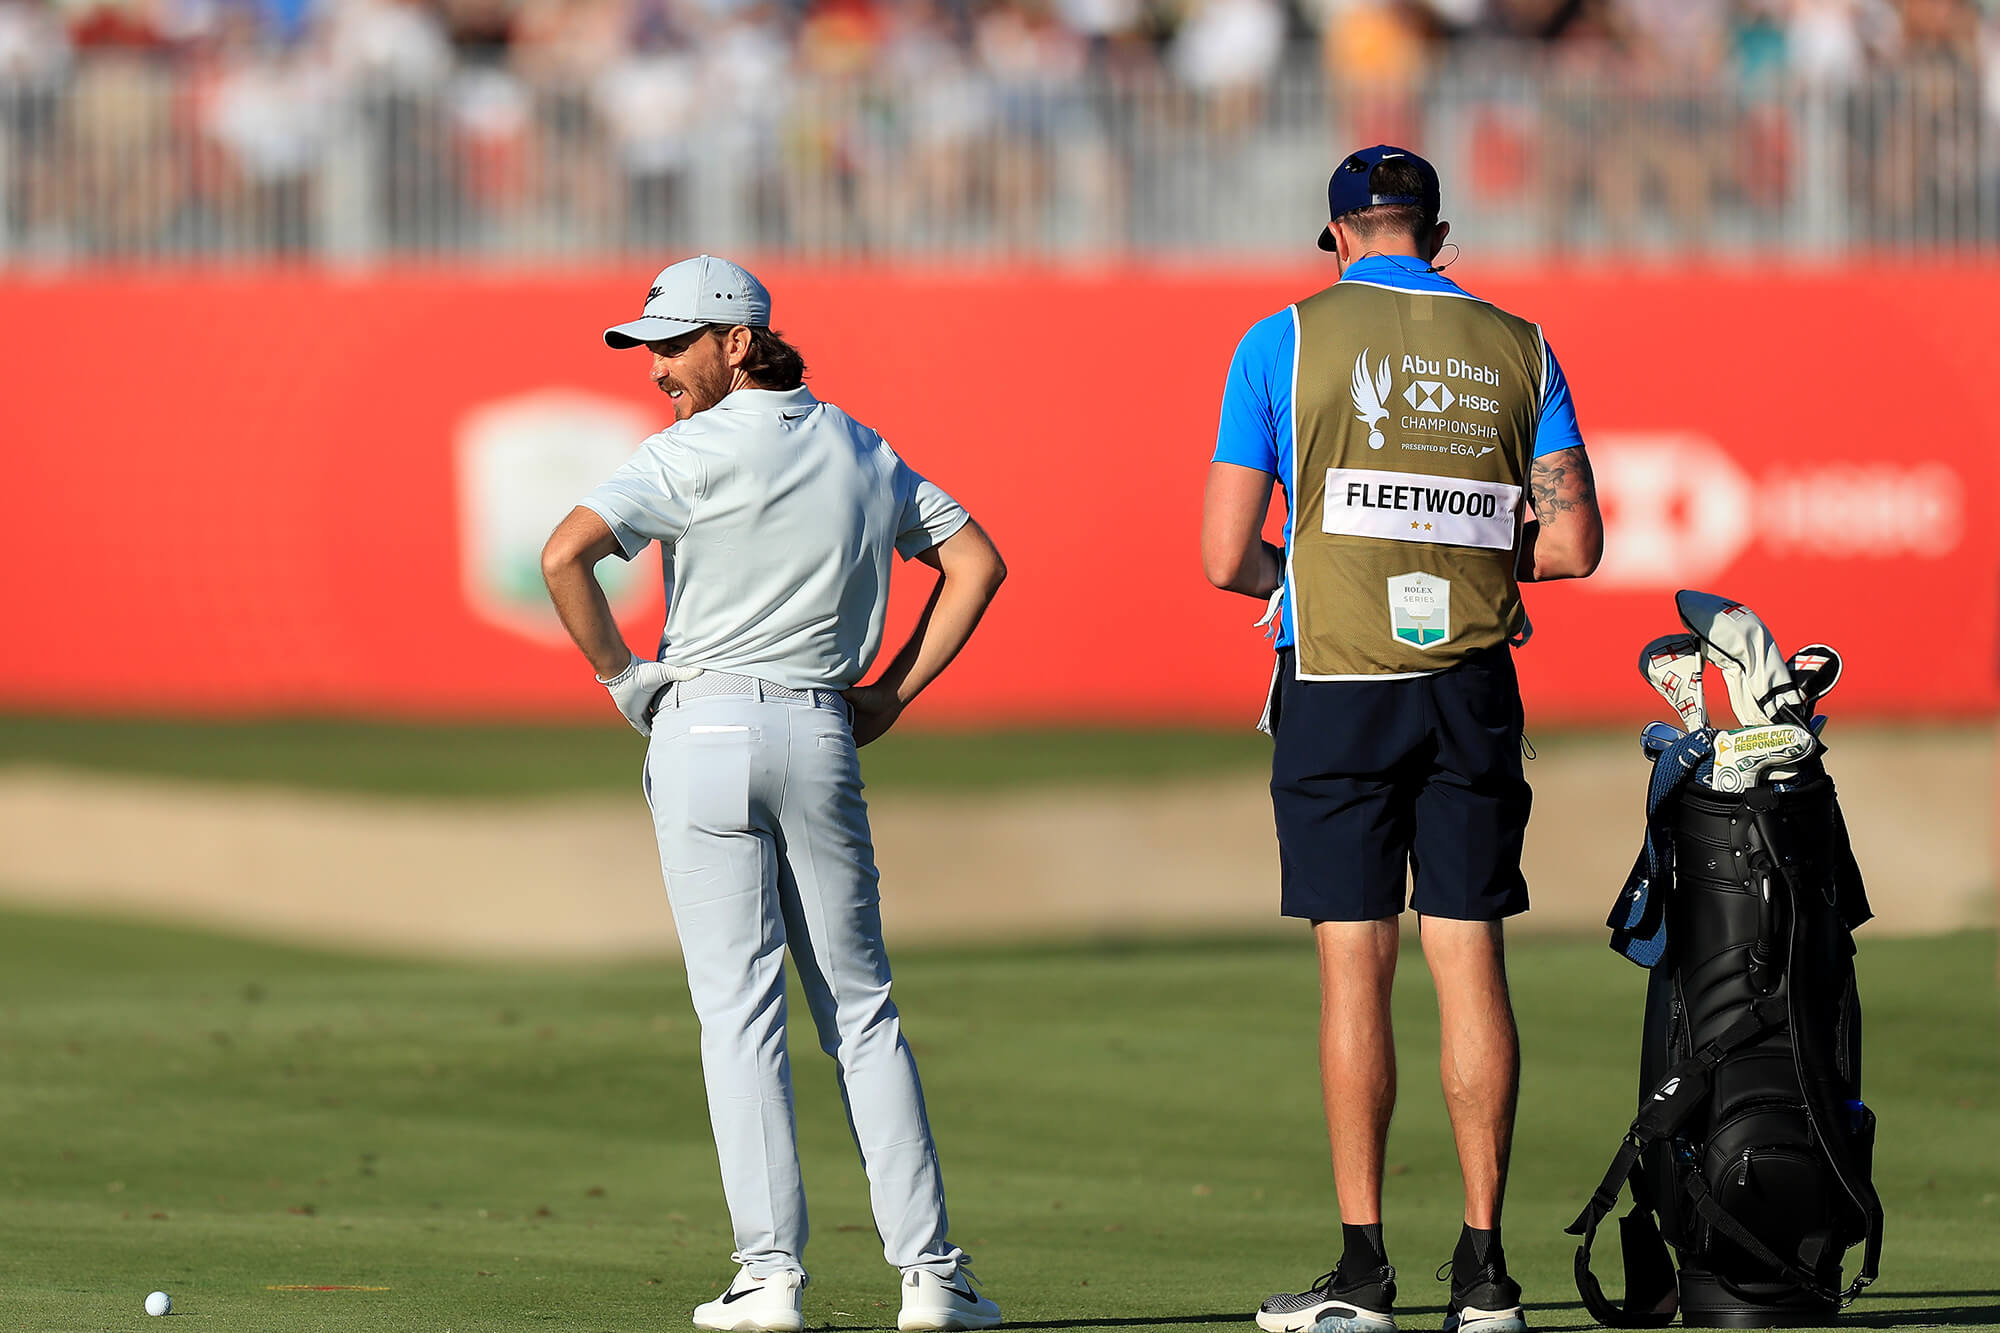 Tommy Fleetwood What's In The Bag? The All Square Blog